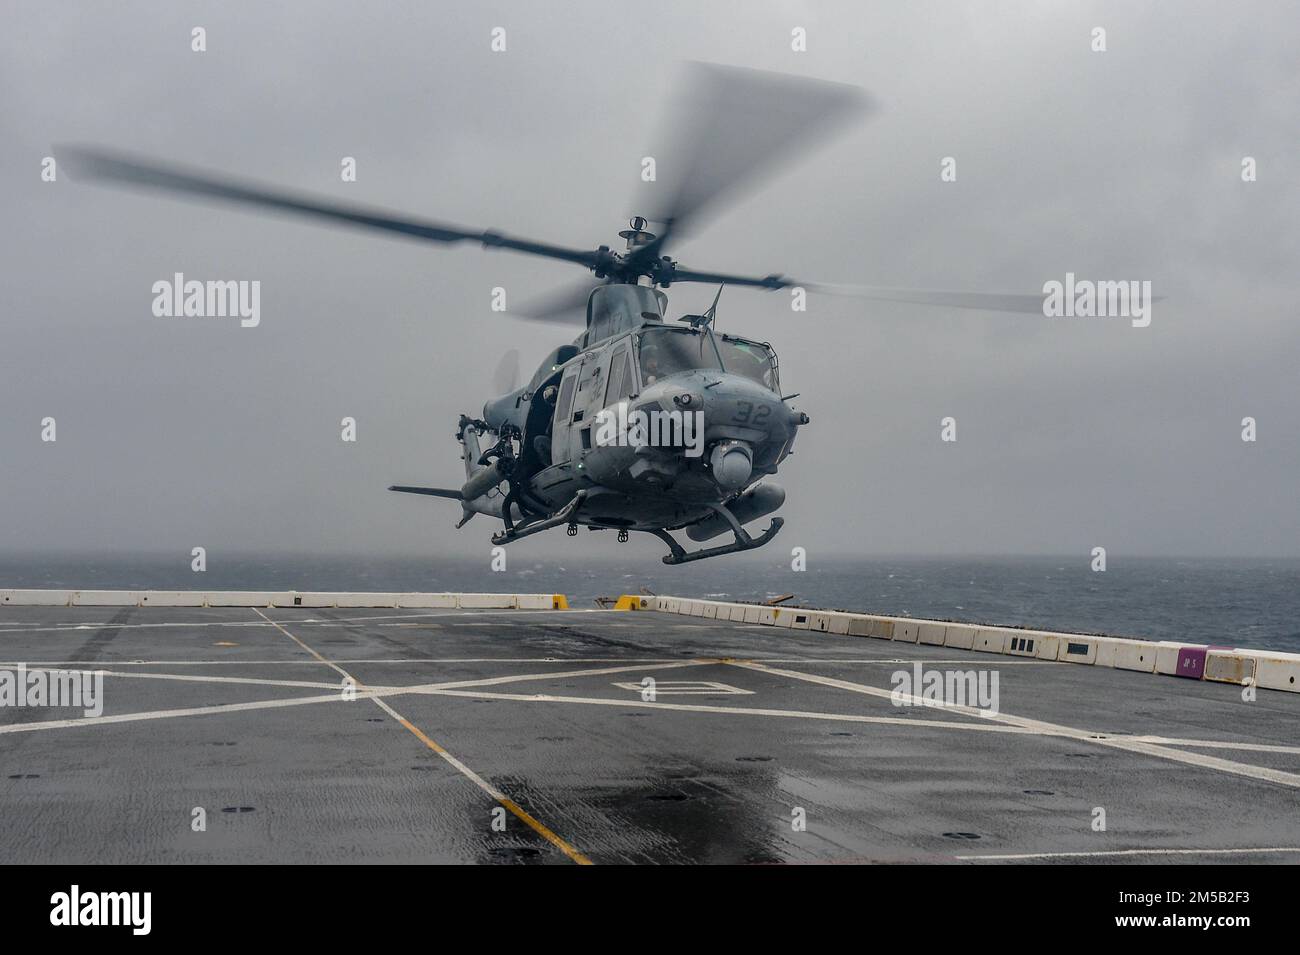 PHILIPPINE SEA (Feb. 17, 2022) A UH-1Y Huey helicopter from Marine Medium Tiltrotor Squadron (VMM) 265 takes off from the flight deck of the amphibious transport dock ship USS Green Bay (LPD 20). Green Bay, part of Expeditionary Strike Group 7, along with the 31st Marine Expeditionary Unit (MEU), is operating in the U.S. 7th Fleet area of responsibility to enhance interoperability with allies and partners and serve as a ready response force to defend peace and stability in the Indo-Pacific region. Stock Photo